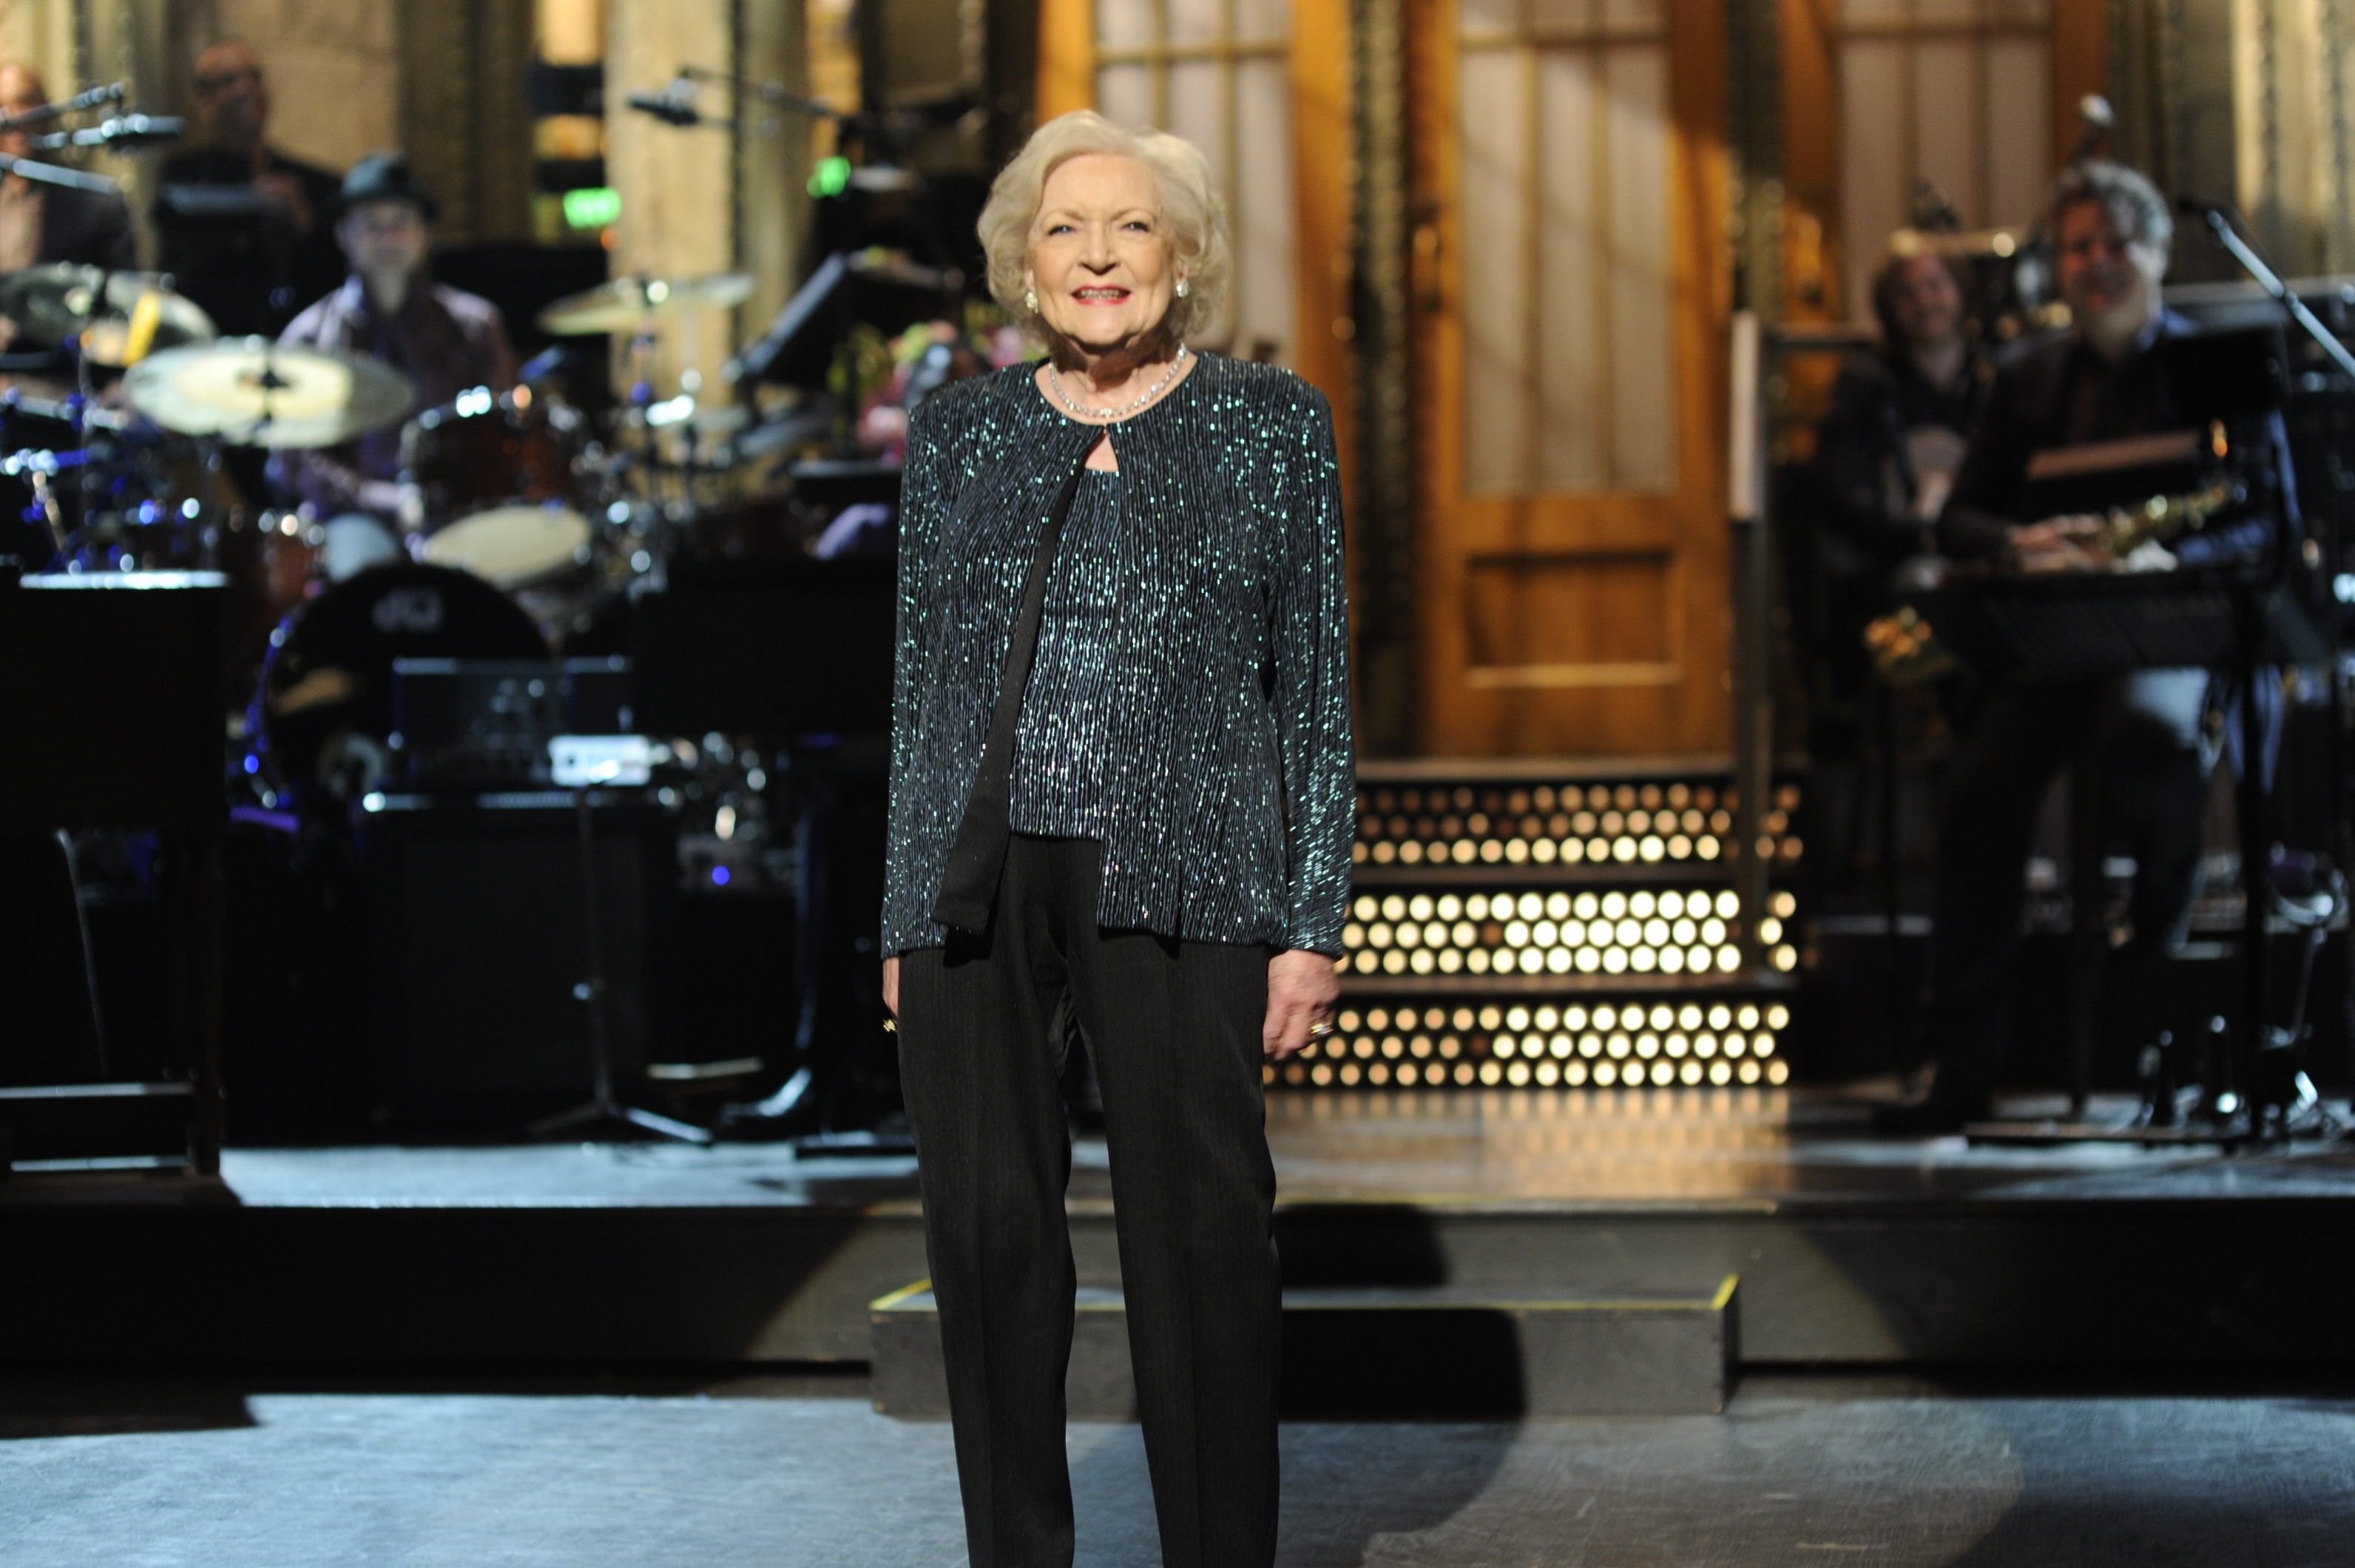 Betty White stands smiling on stage in a glittery jacket with a band in the background